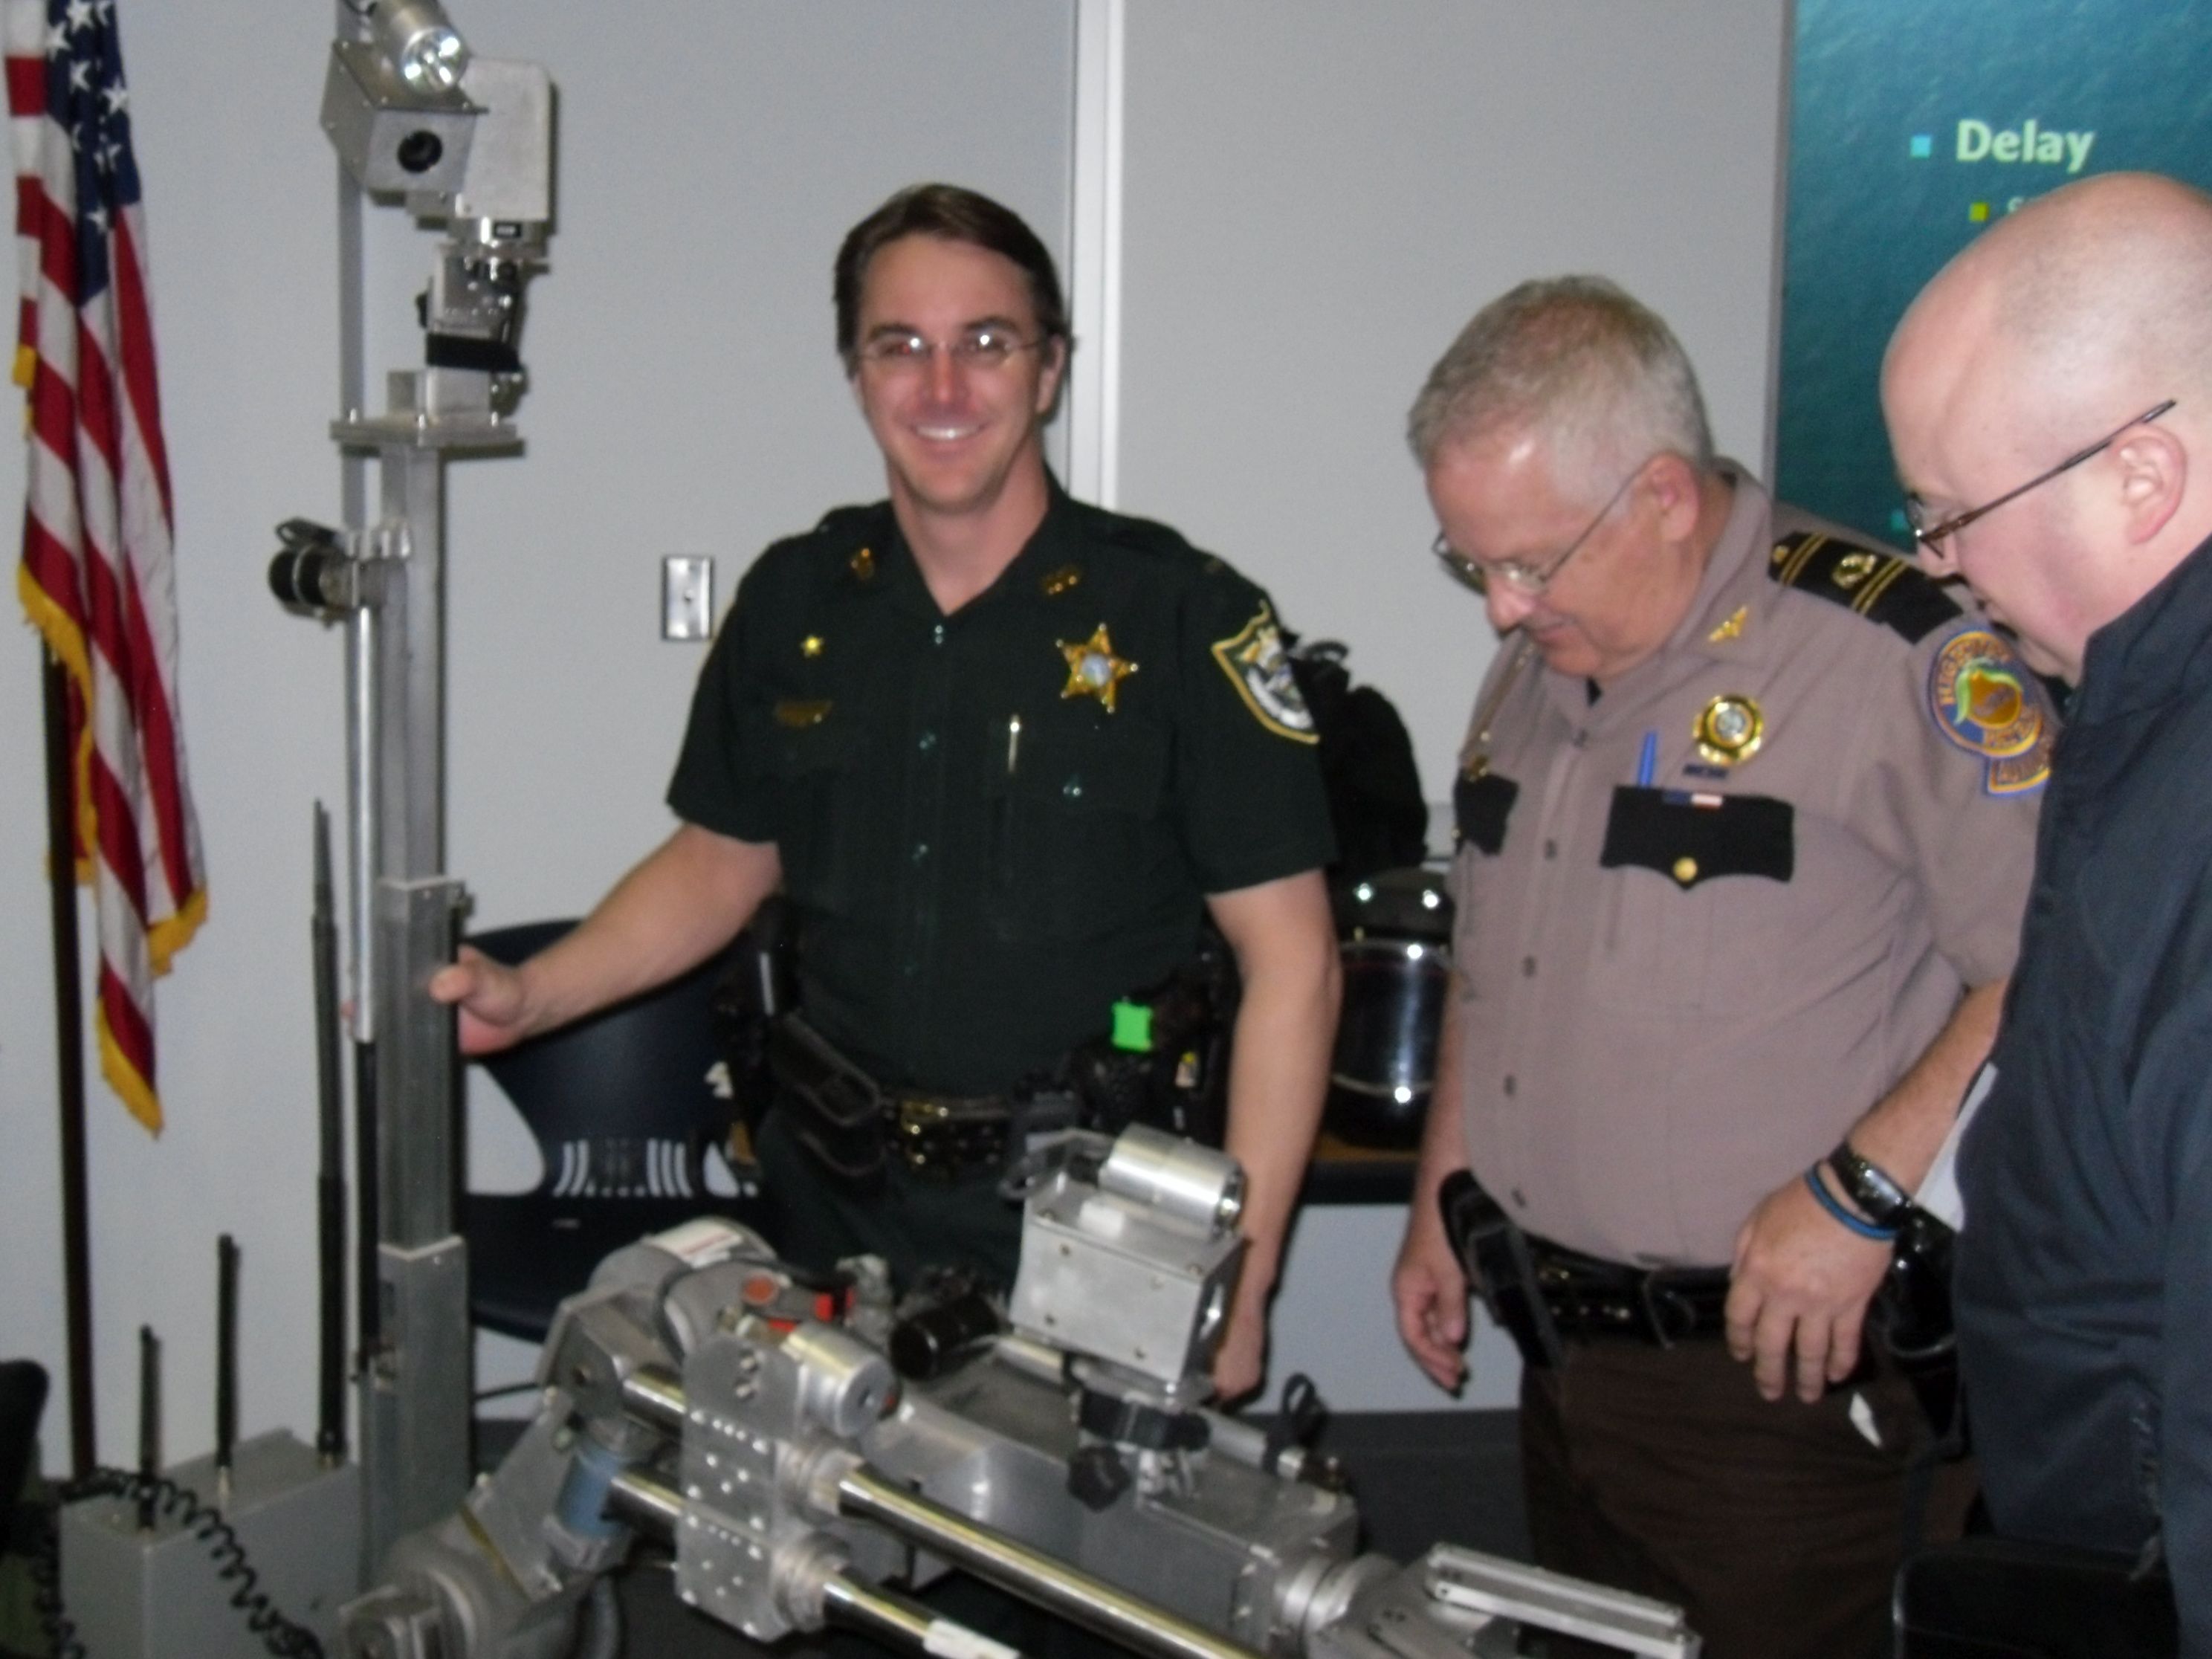 Alachua County Sheriff's Lt. Steve Miller, FHPA Chief Spence Price & VLEOA Director OPP Auxiliary Harold Wax